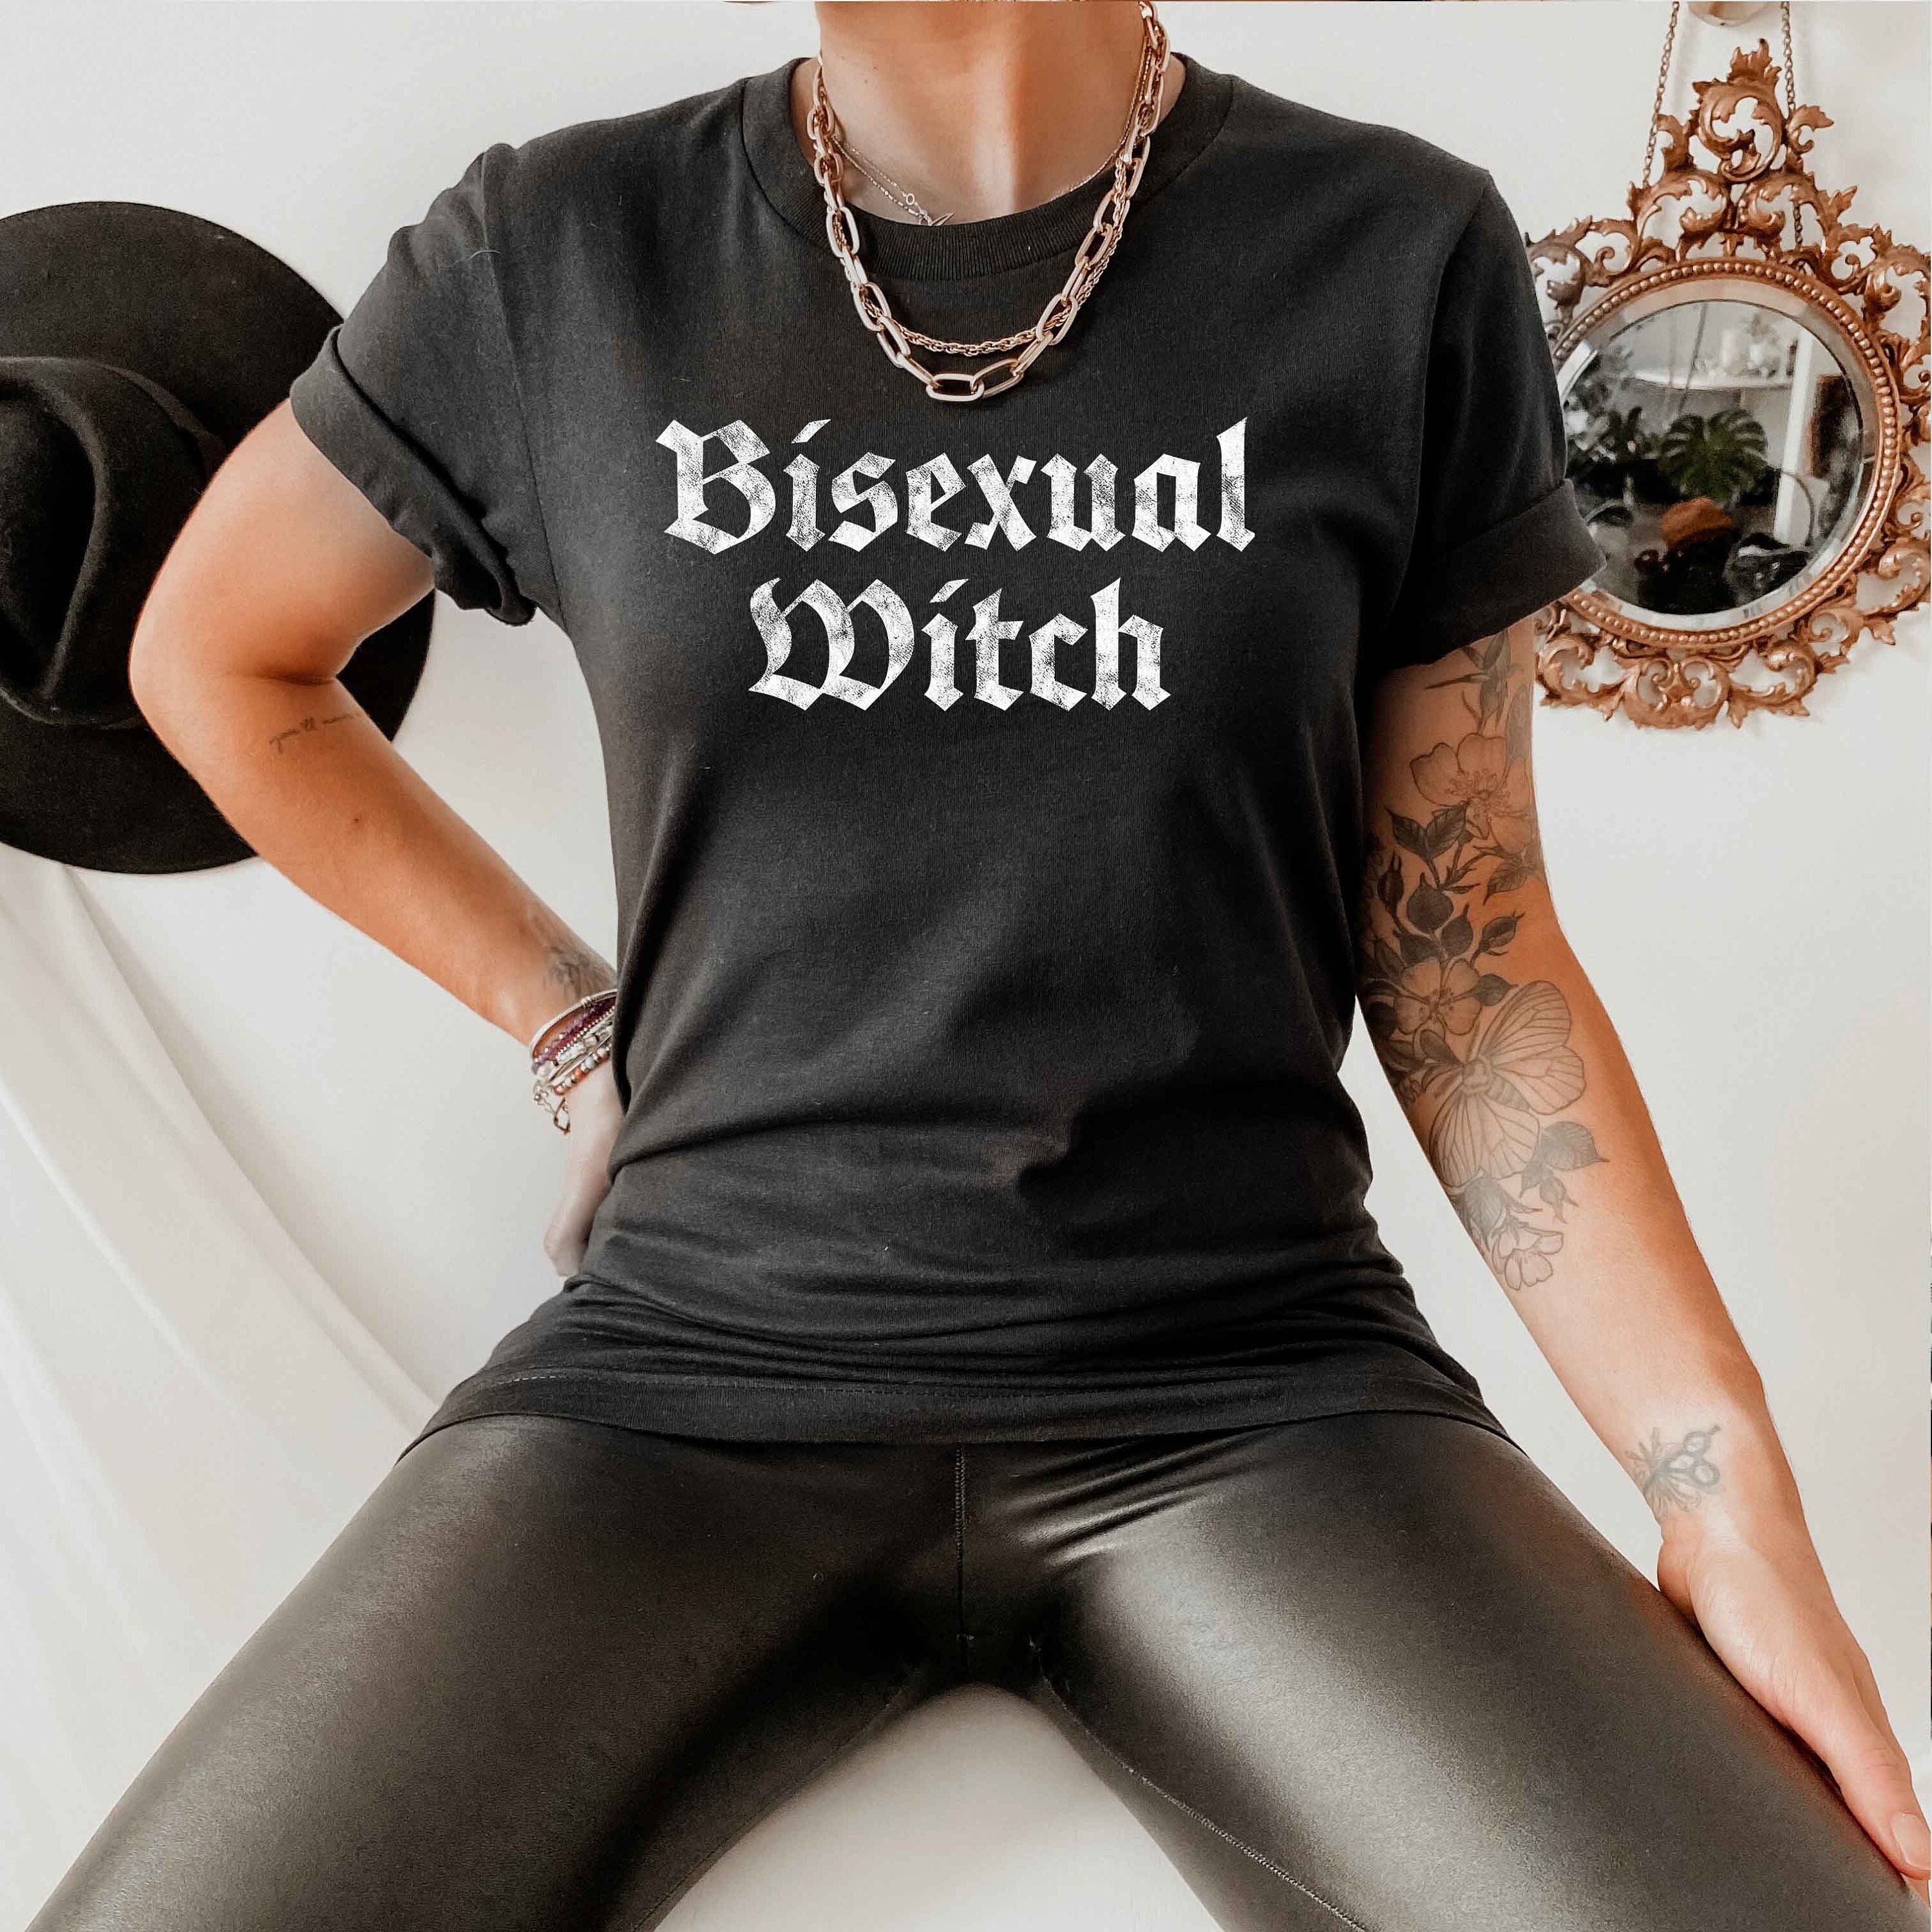 2pcs Bisexual Witch Charms – TootsGoods